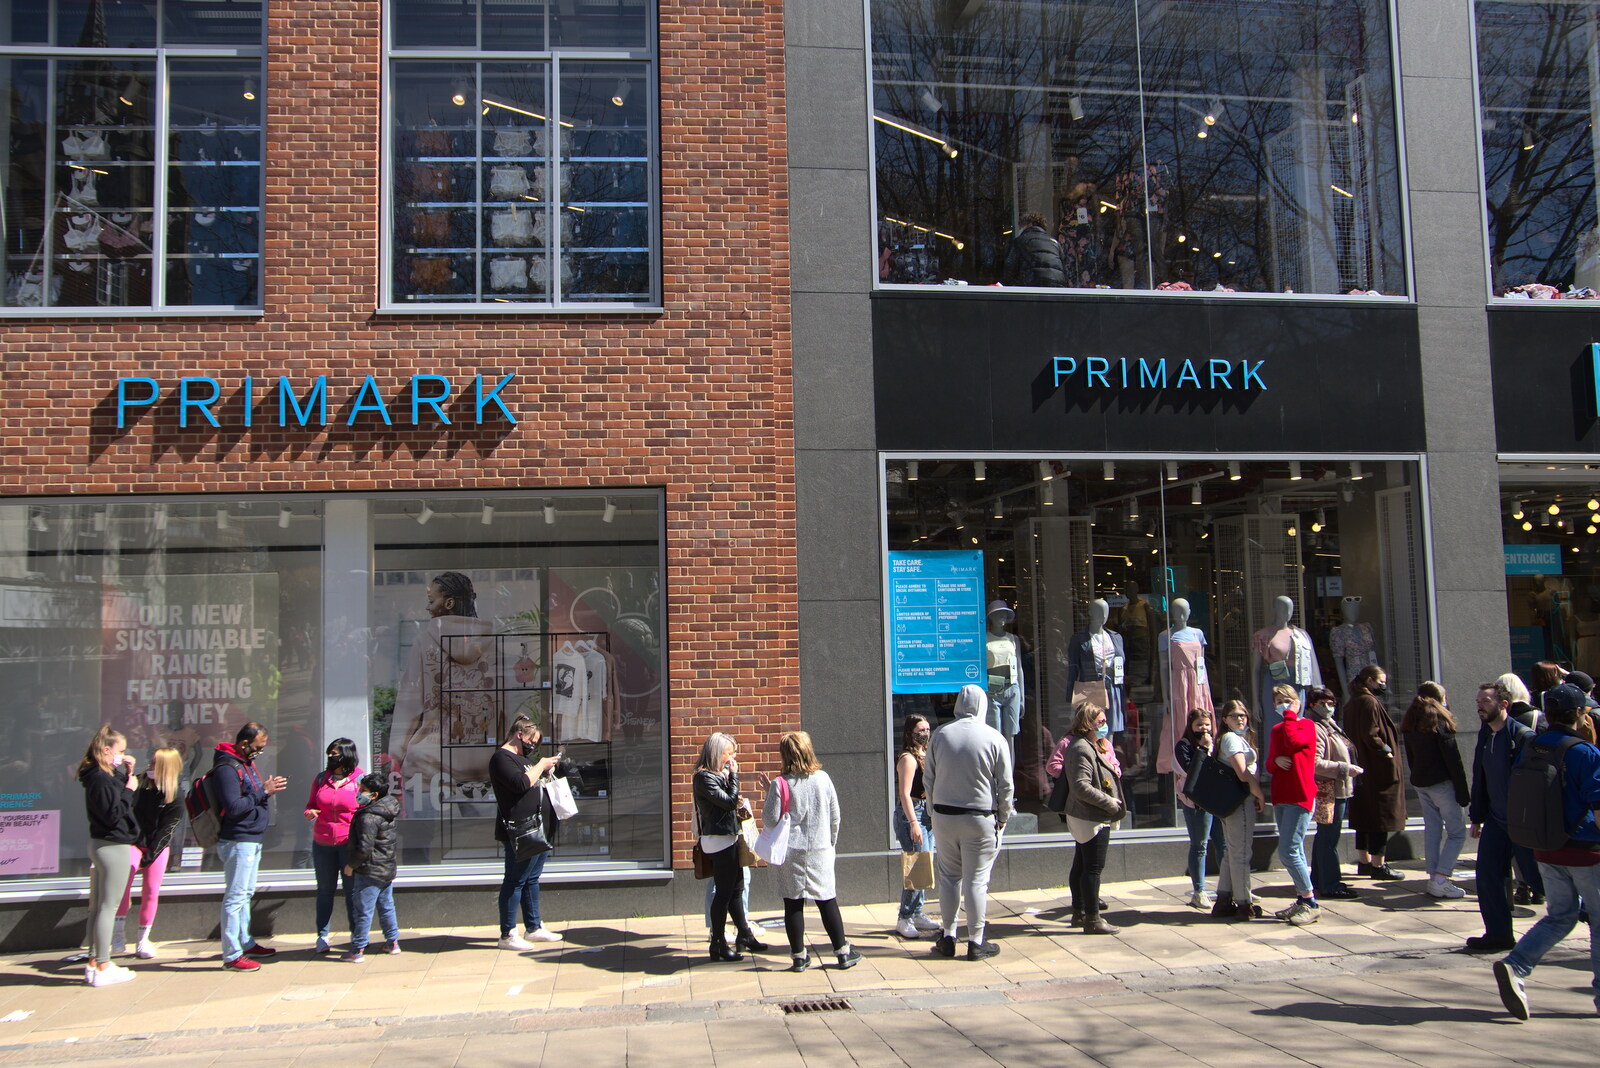 Queueing for Primark, as featured on the news from The Death of Debenhams, Rampant Horse Street, Norwich, Norfolk - 17th April 2021